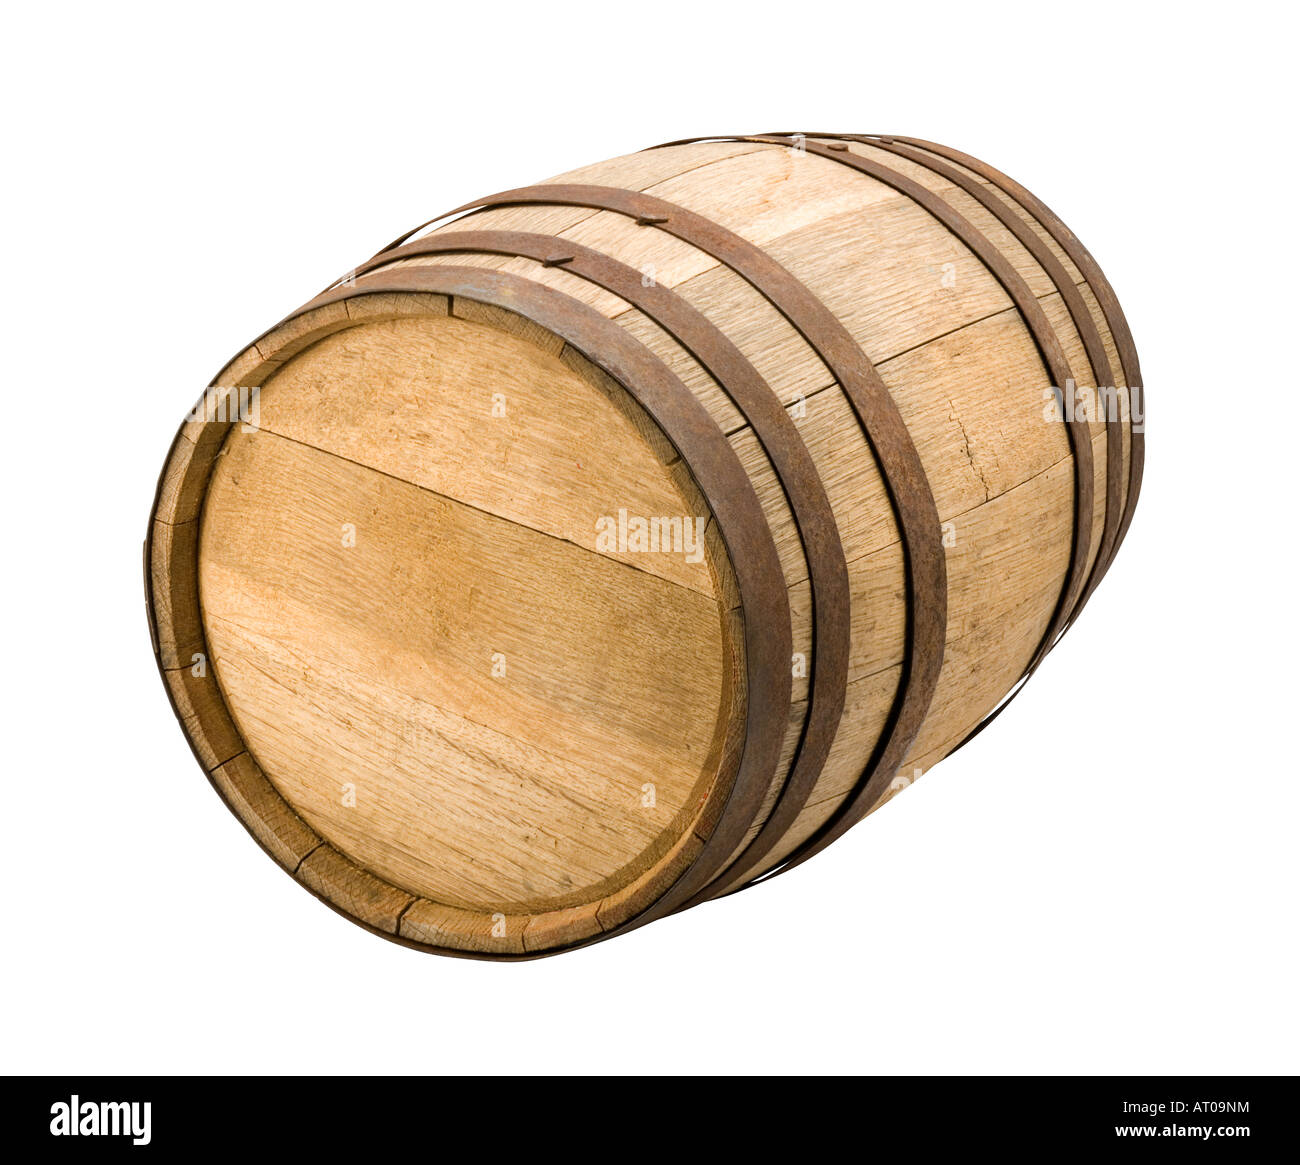 Barrel isolated on a white background. Stock Photo